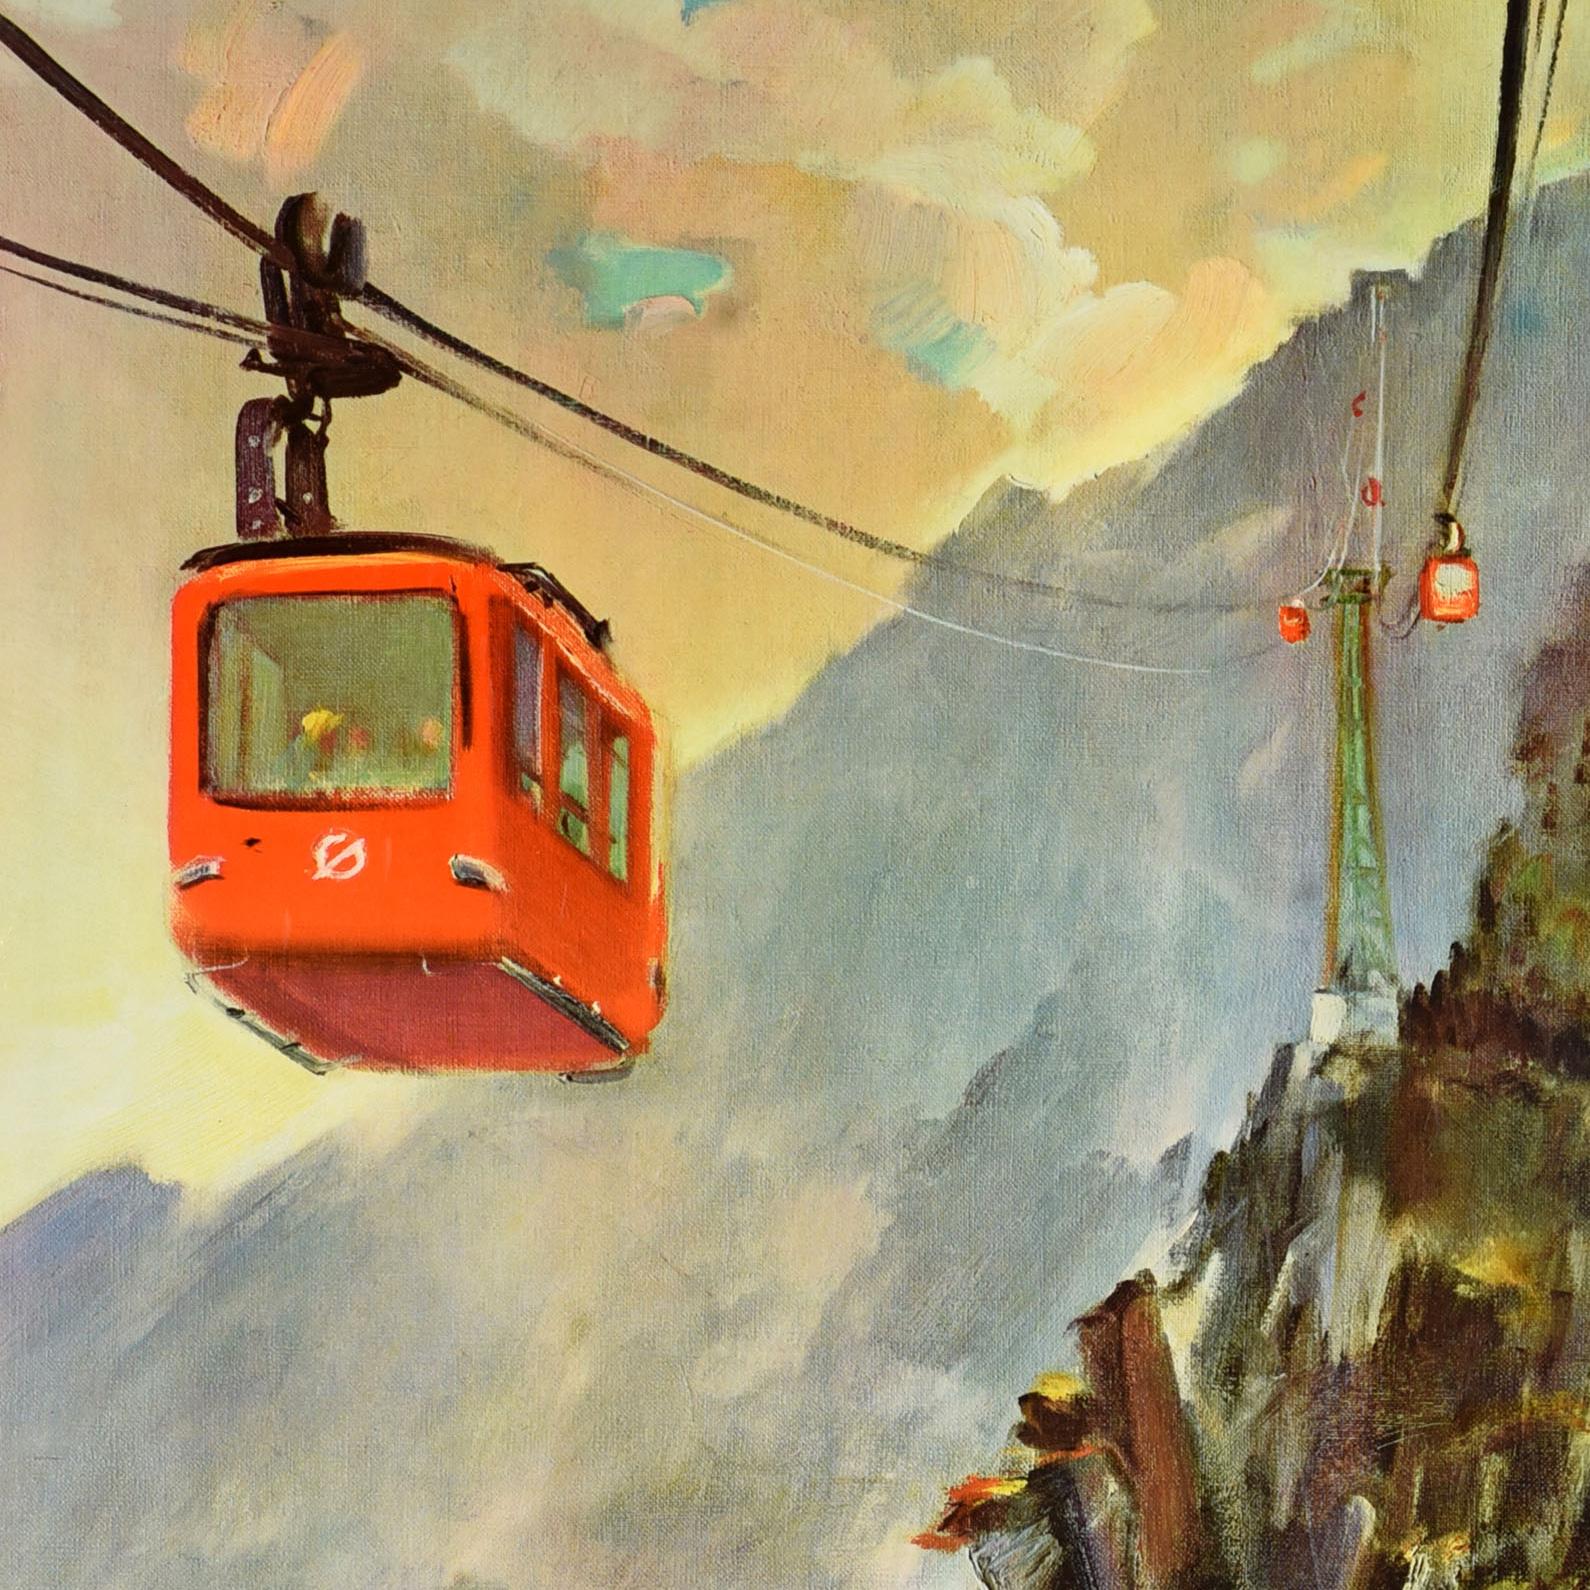 Original vintage Asia travel poster for the Gozaisho Ropeway 御在所ロープウェイ in Japan featuring people in red cable car cabins travelling up and down the mountain with the colourful forest below. Opened in 1959, the Mount Gozaisho Ropeway is a Japanese